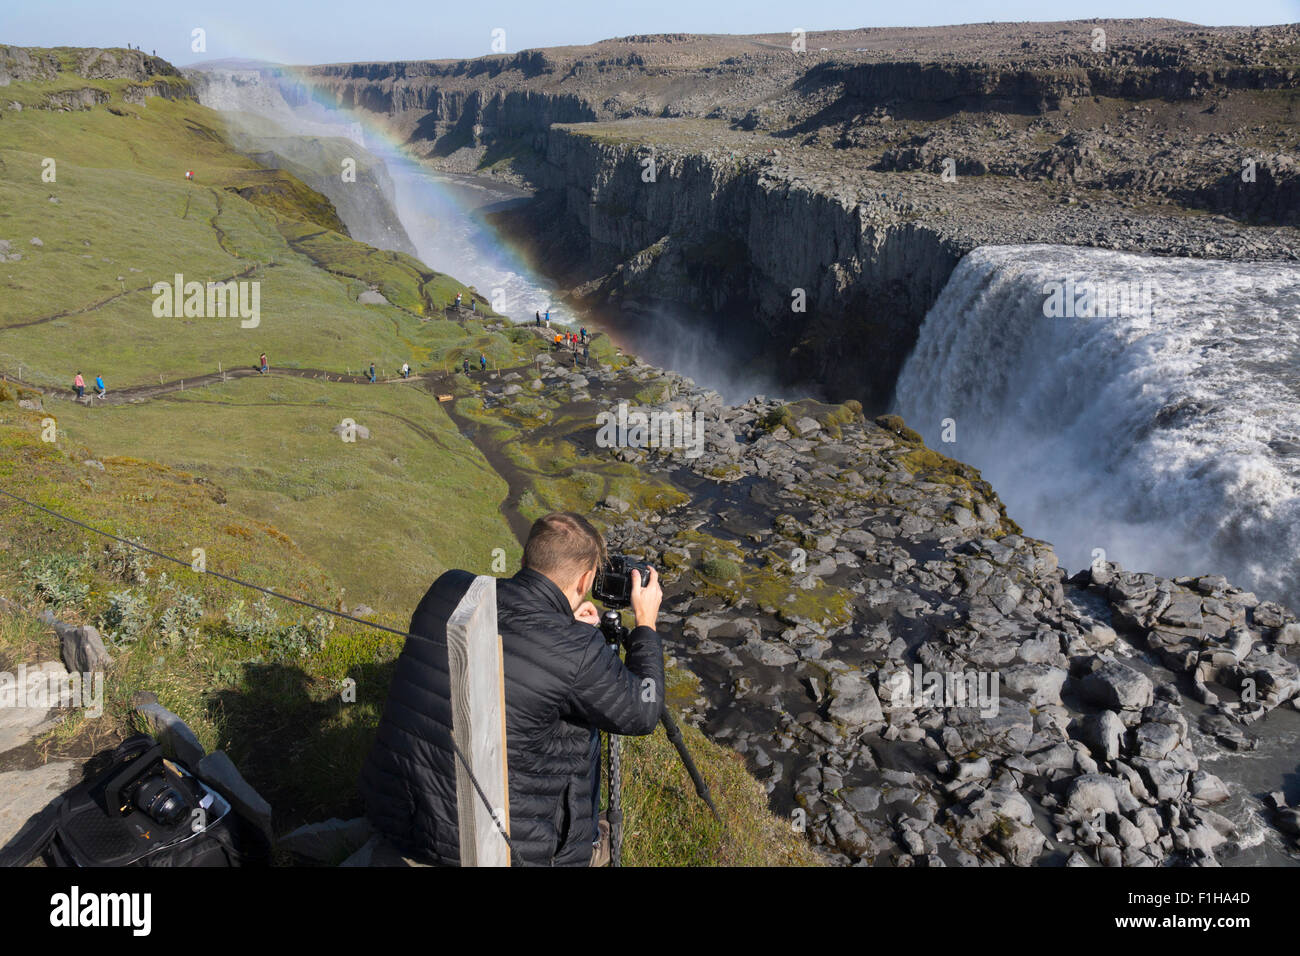 A professional photographer taking a picture of Dettifoss waterfall, in the Jökulsárgljúfur canyon, Vatnajökull National Park, northeast Iceland Stock Photo